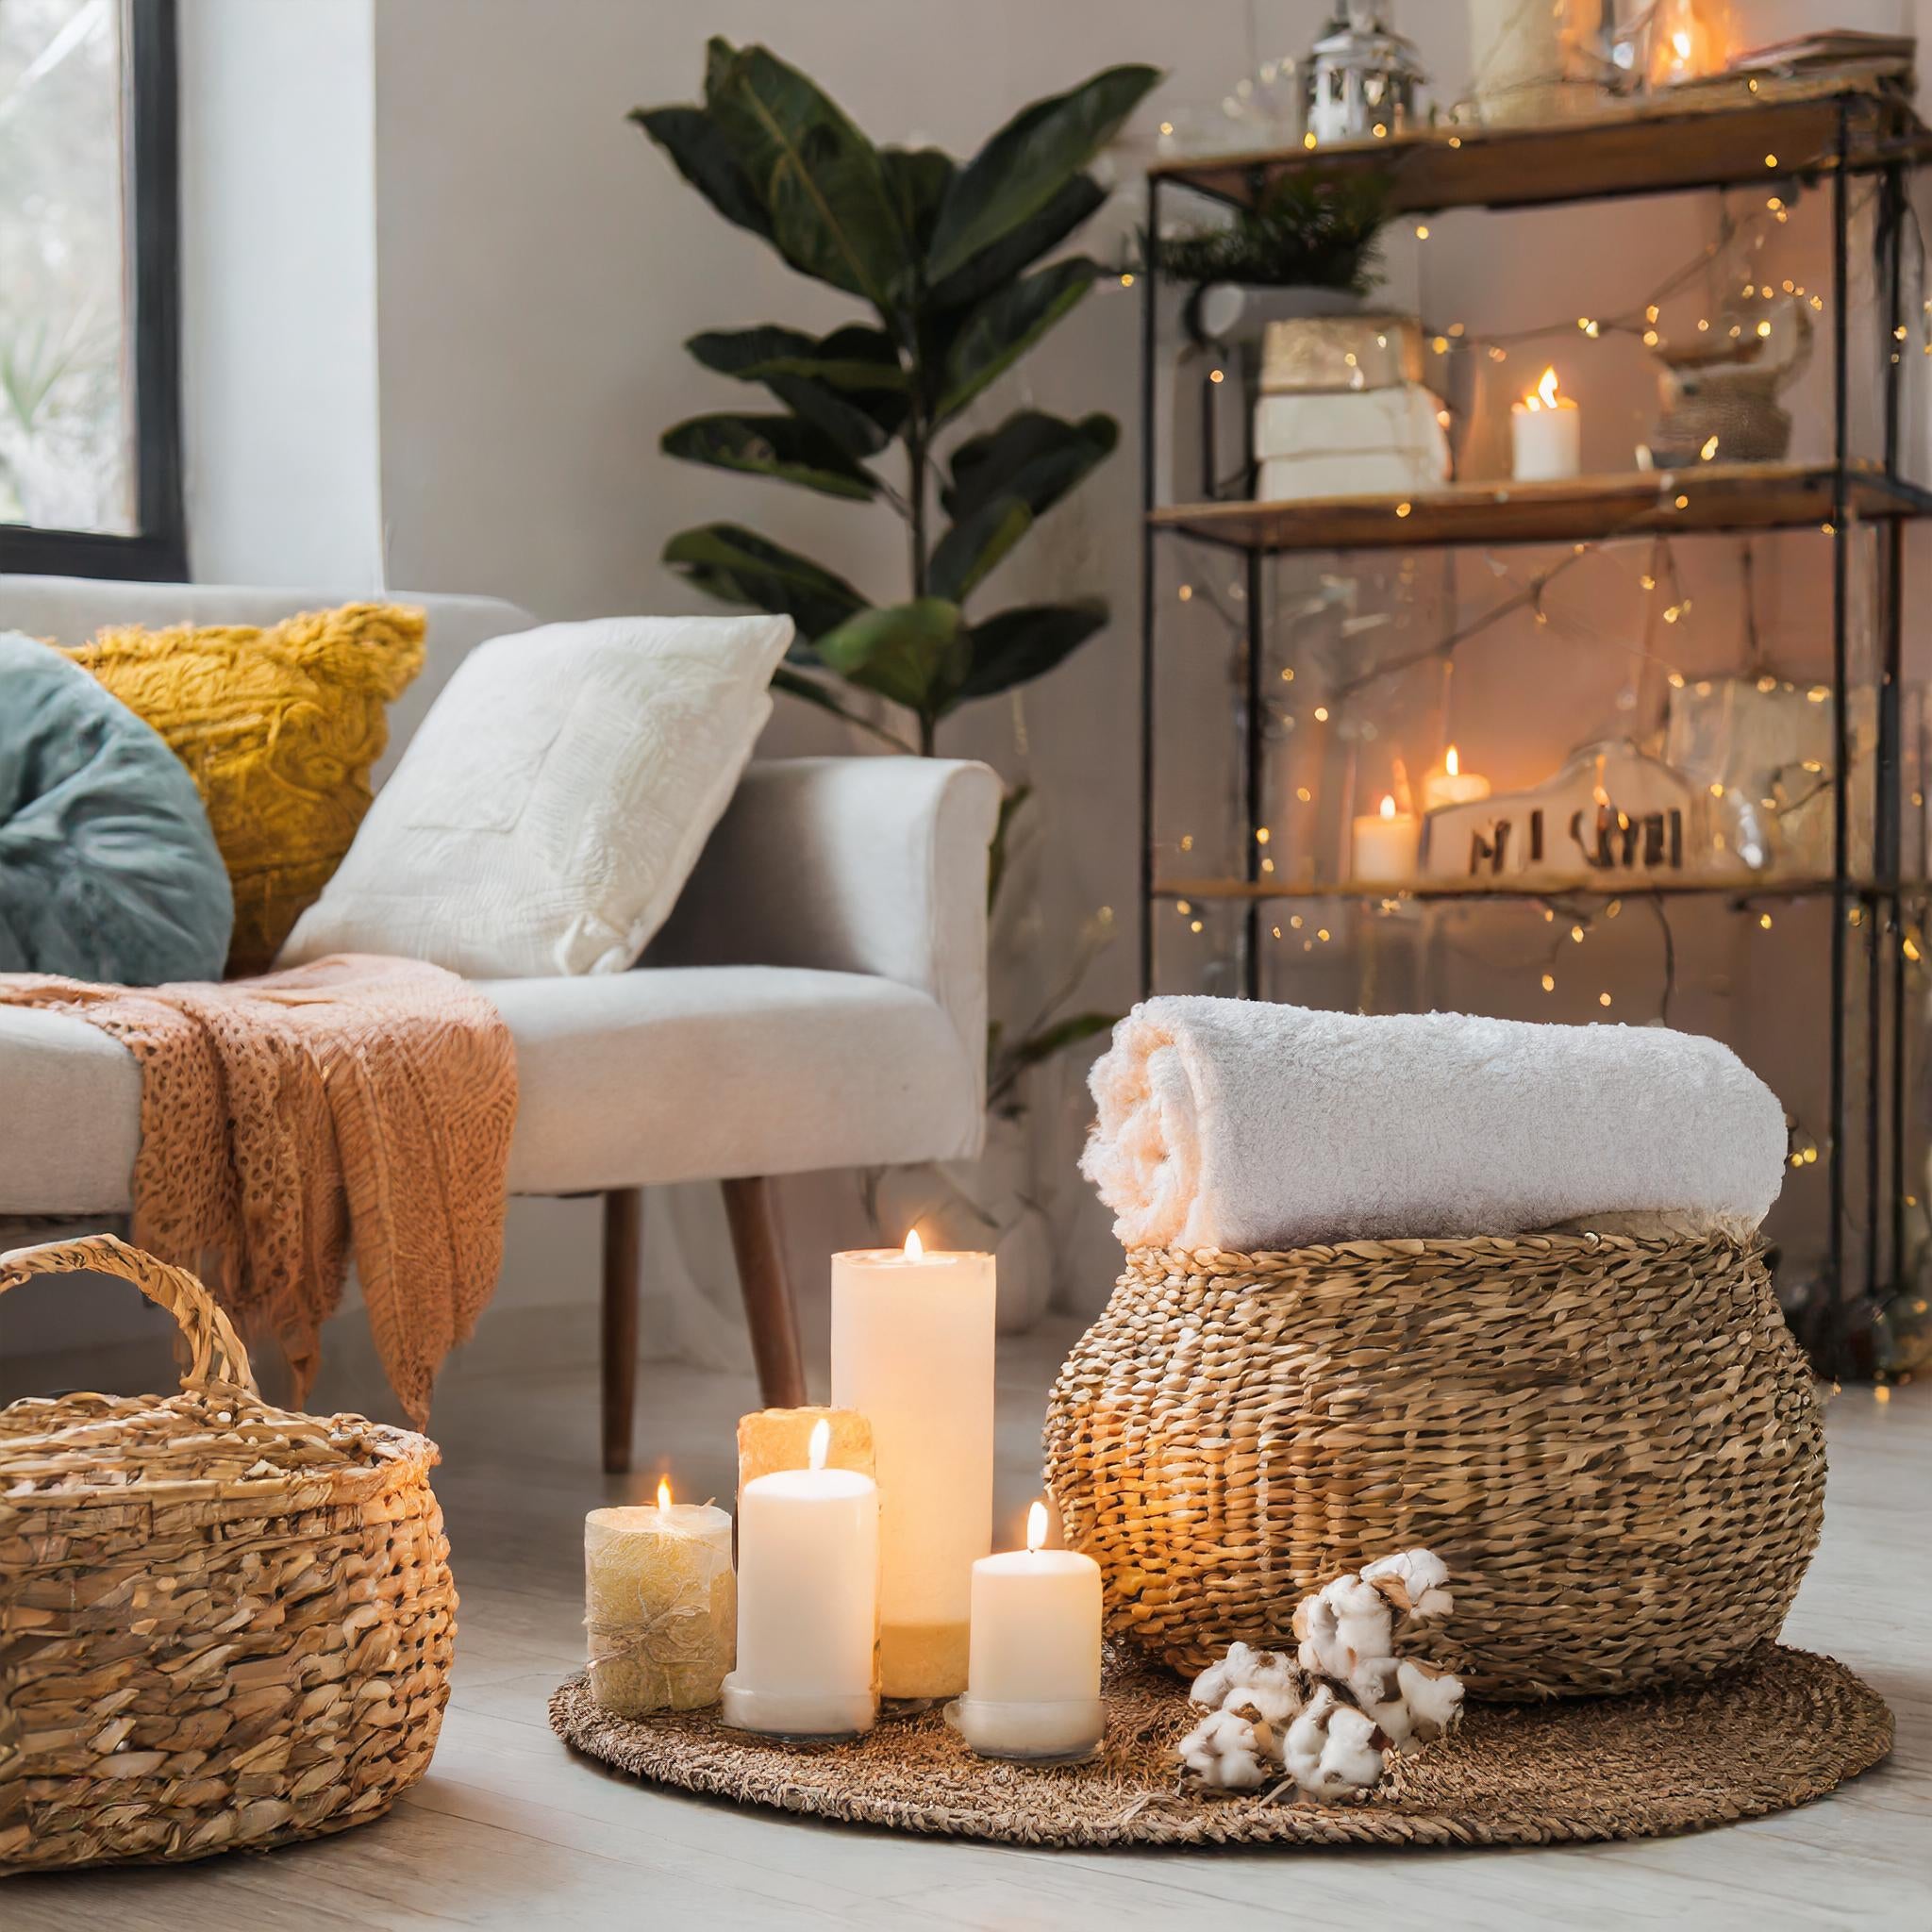 A cosy room with a white sofa, tall plant, fairy lights, round baskets with towels and church candles sitting on a rug